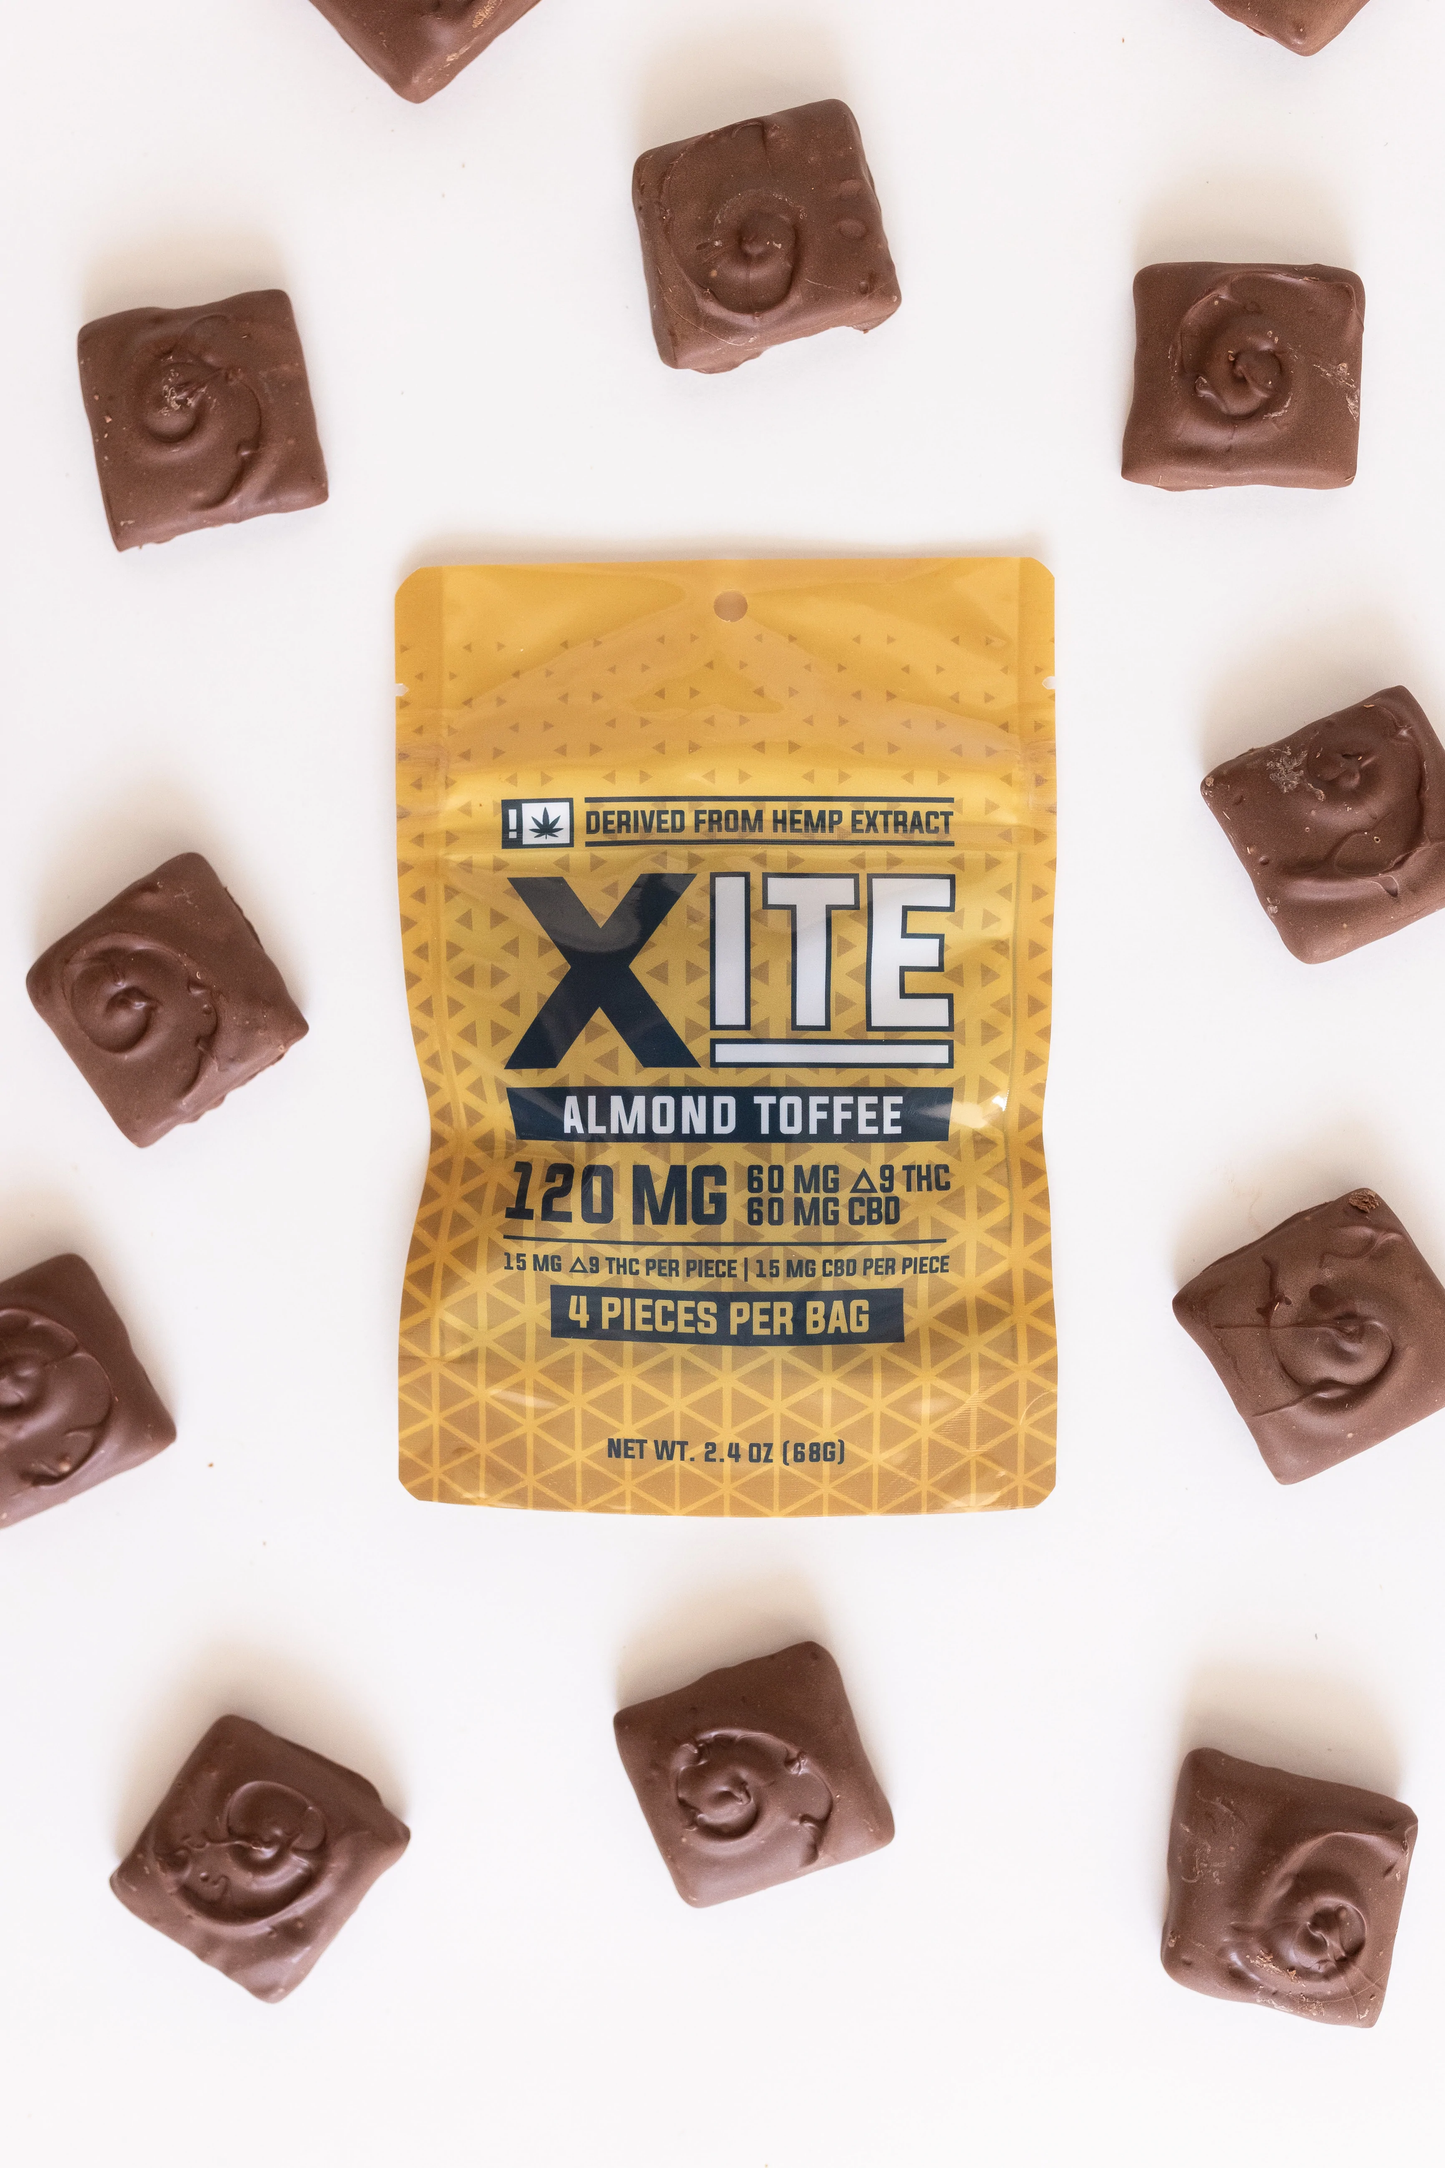 Patsy's Xite Delta 9 THC Ratio Almond Toffee (4 count)